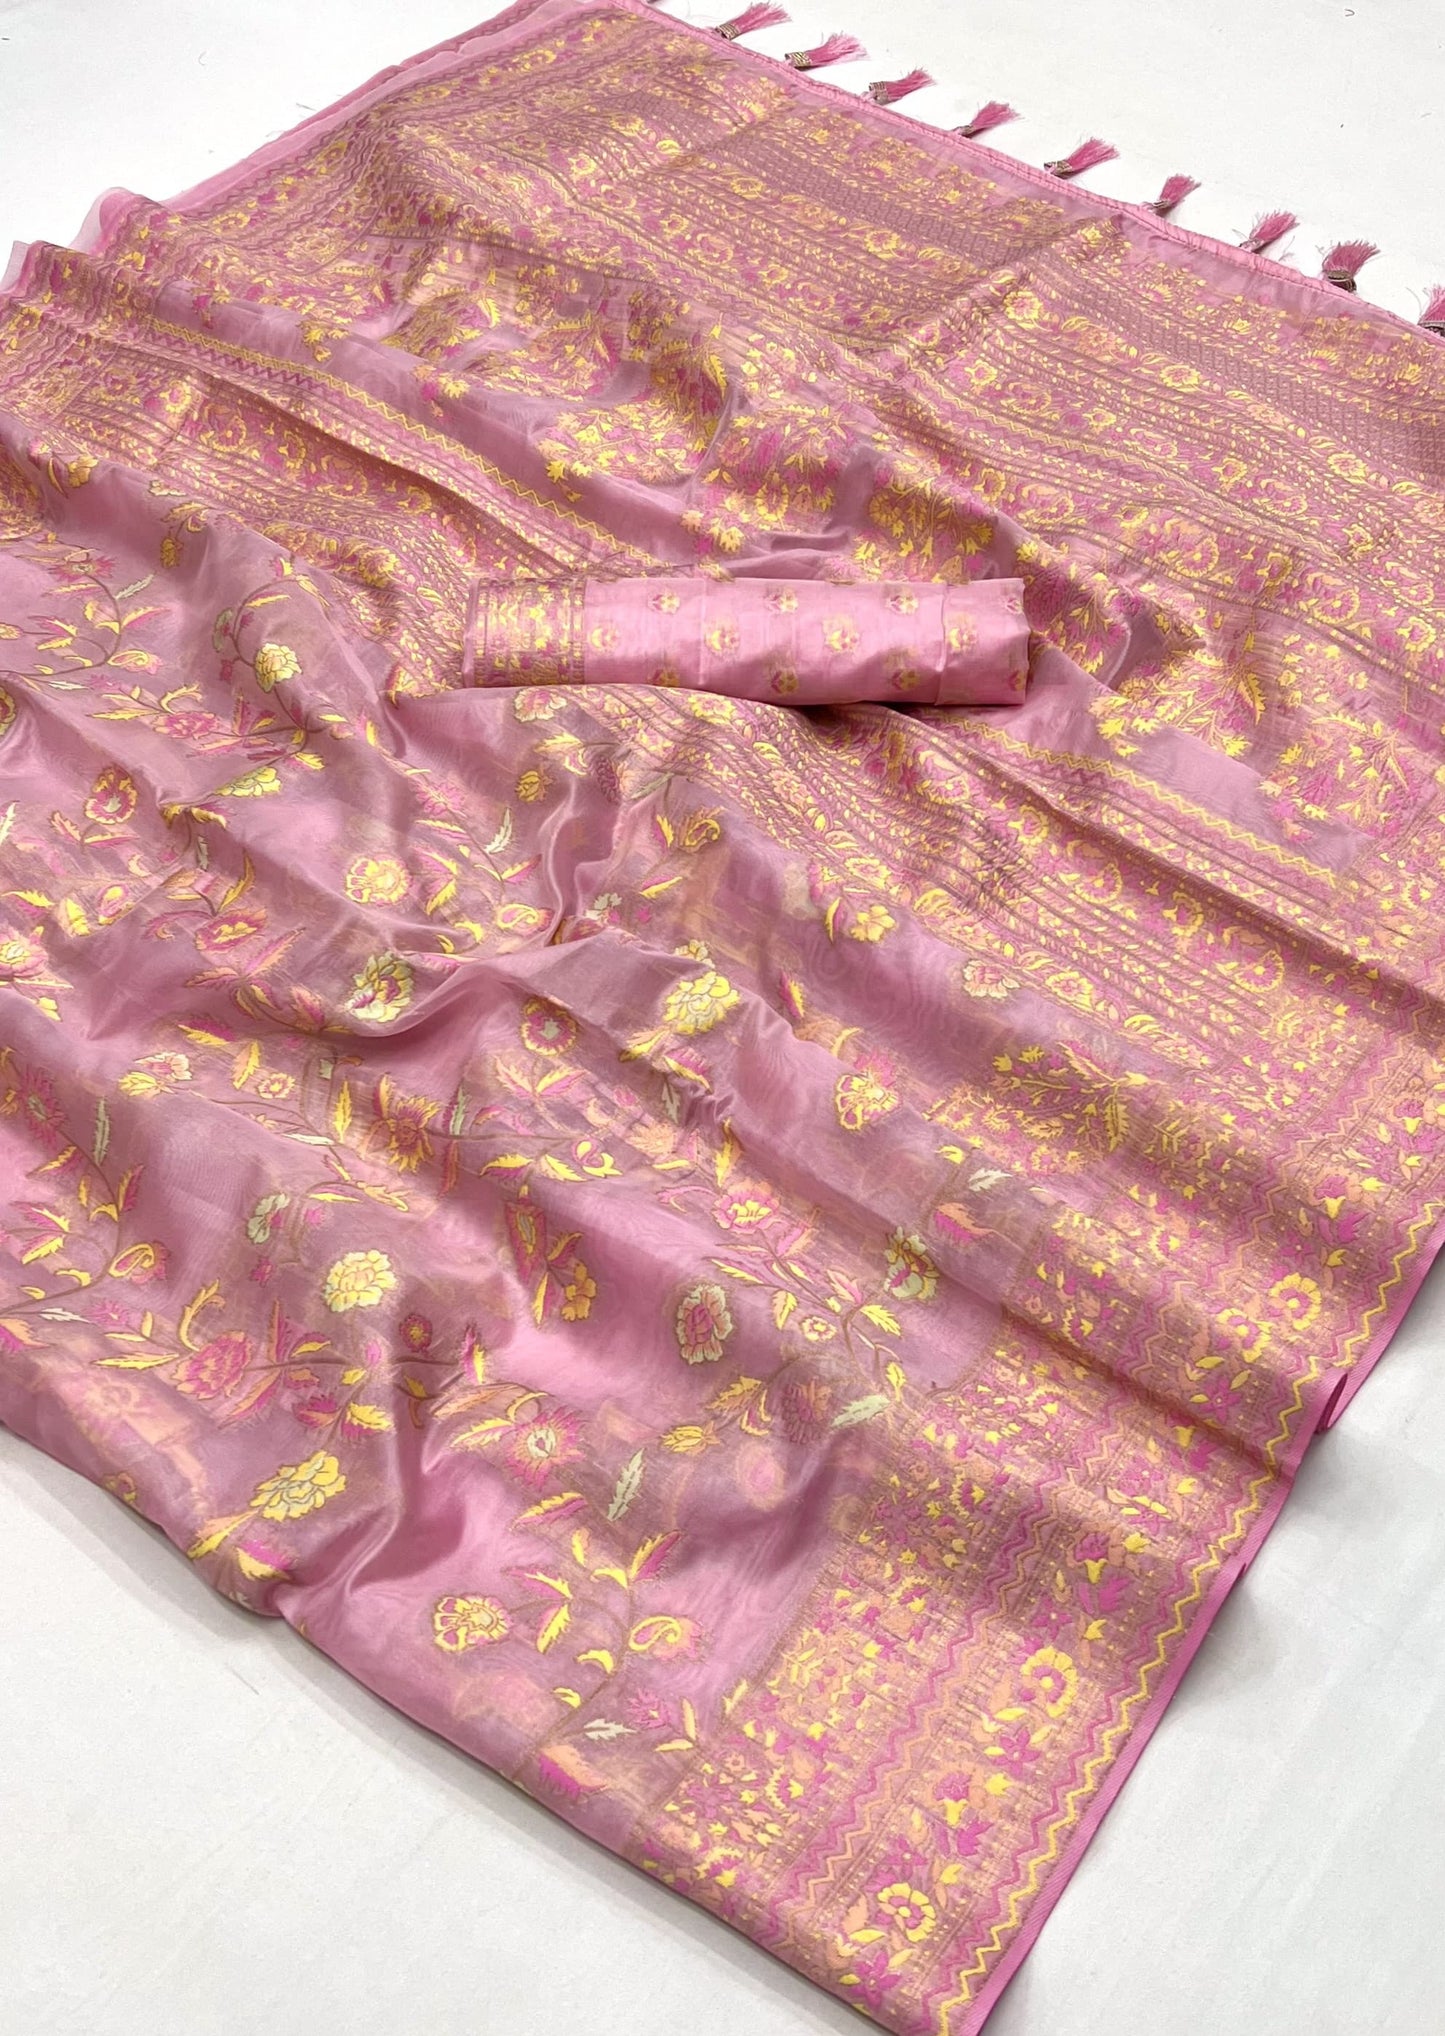 Kashmiri organza embroidered bridal saree online shopping for wedding in rose pink color.